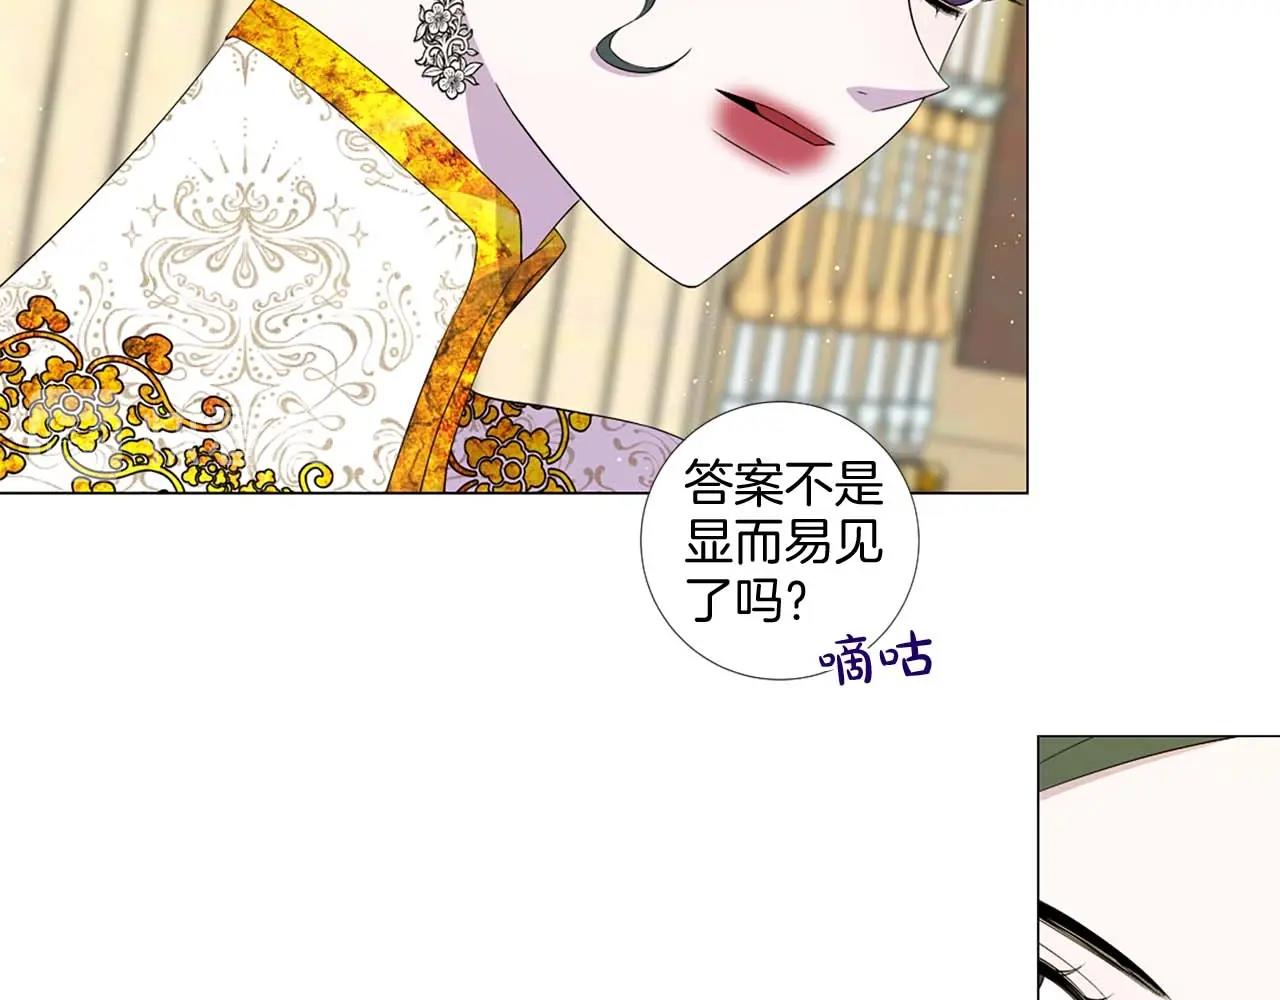 Lady to Queen-勝者爲後 - 第39話 證據確鑿！(2/3) - 1